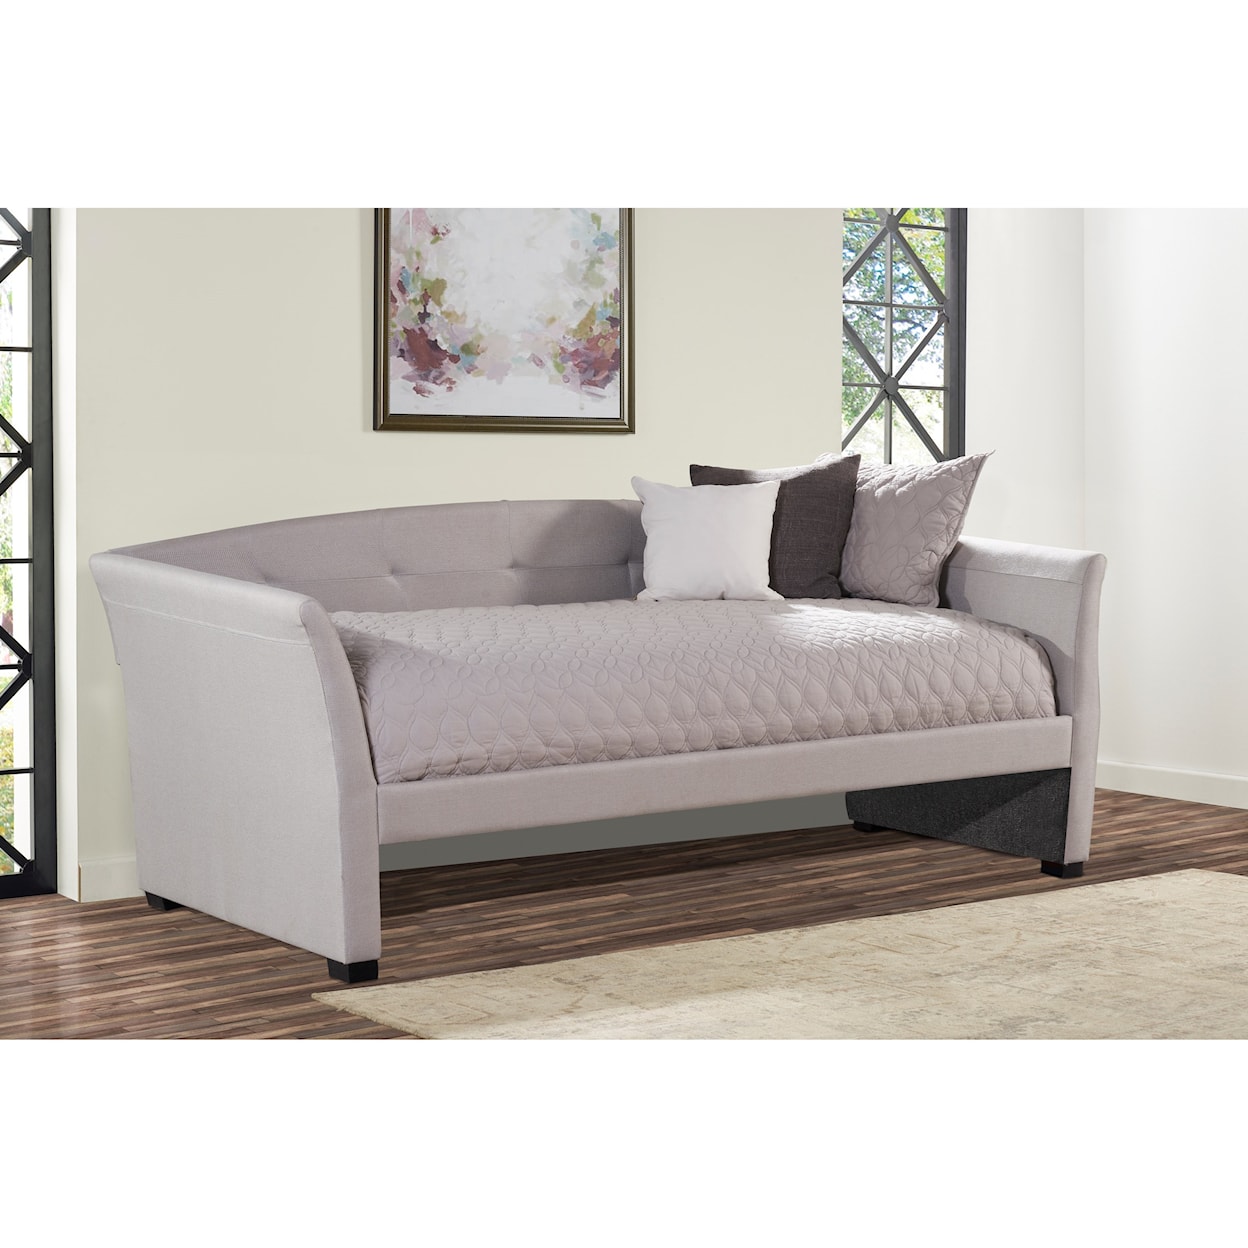 Hillsdale Morgan Upholstered Daybed